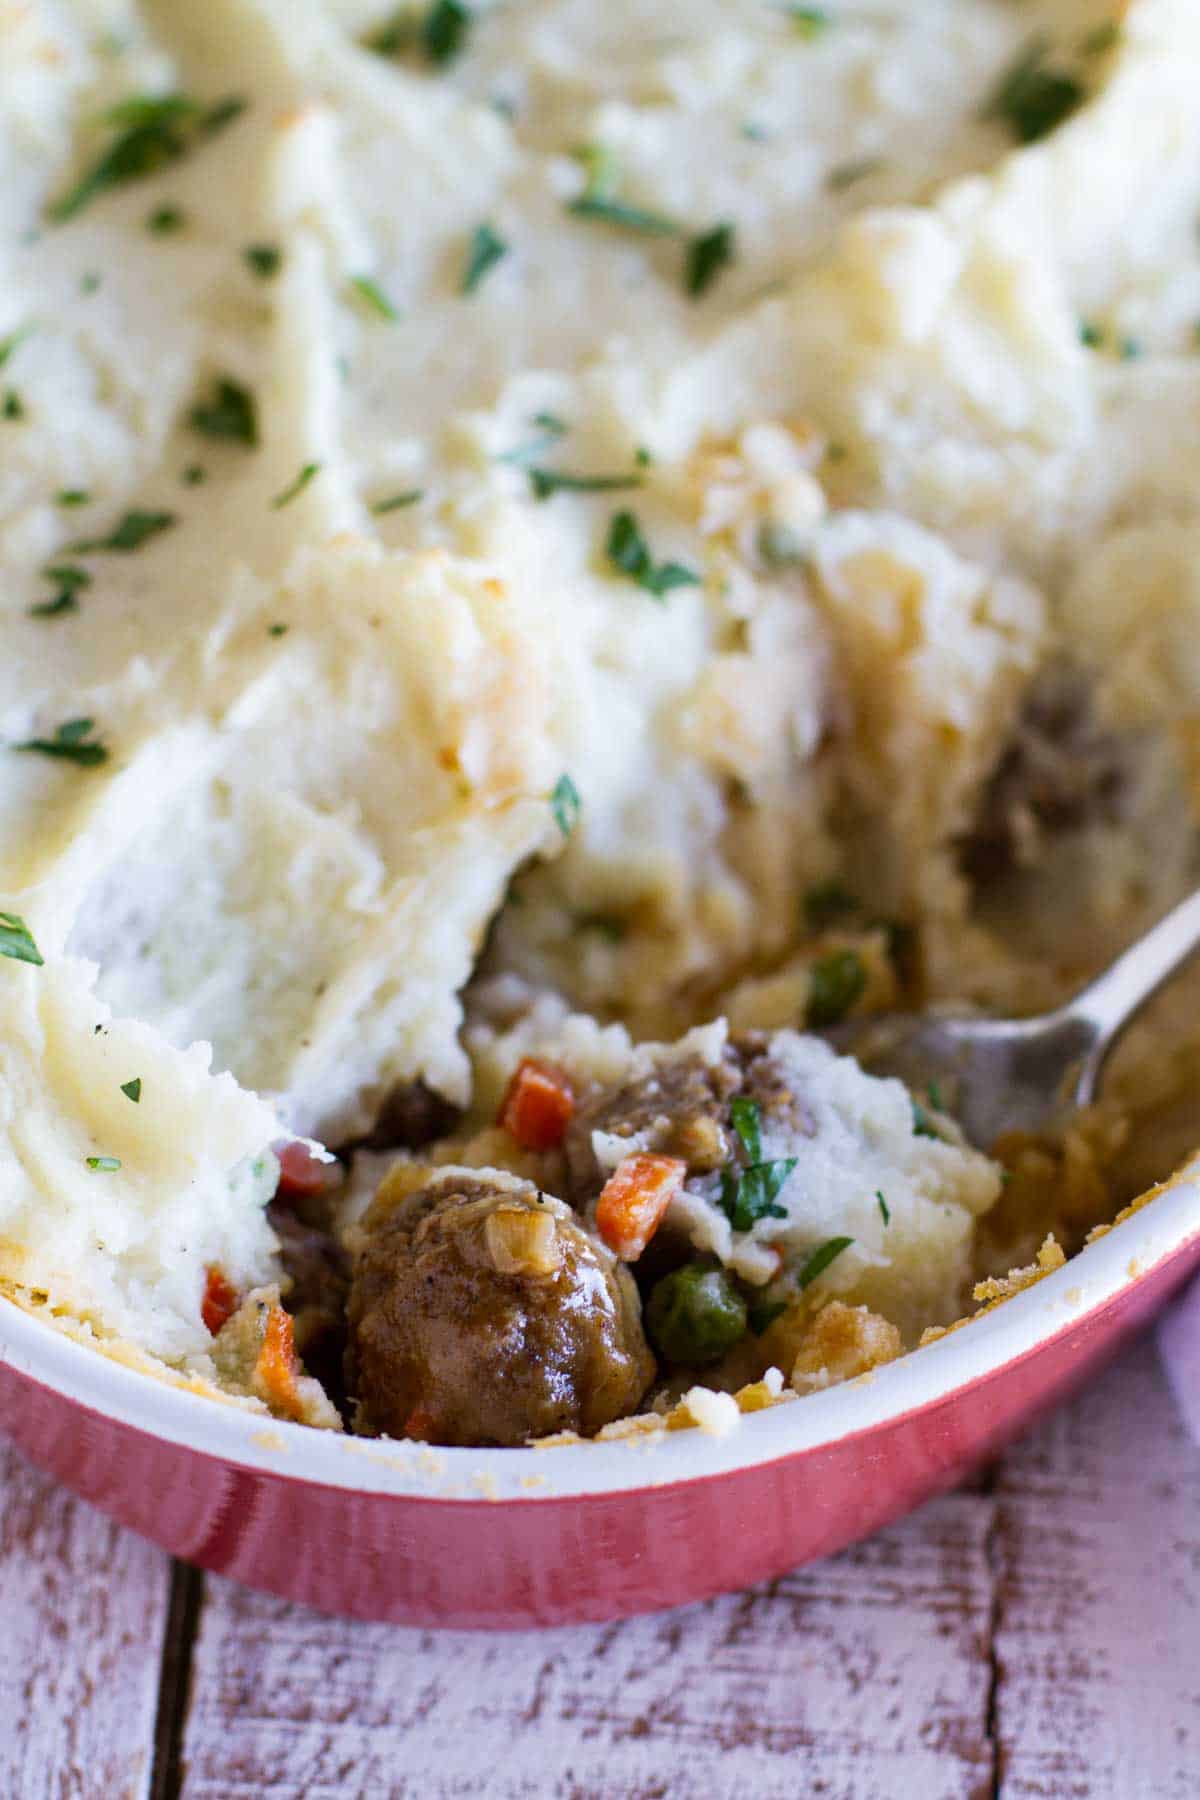 Meatball cottage pie, showing interior with meatballs and vegetables.